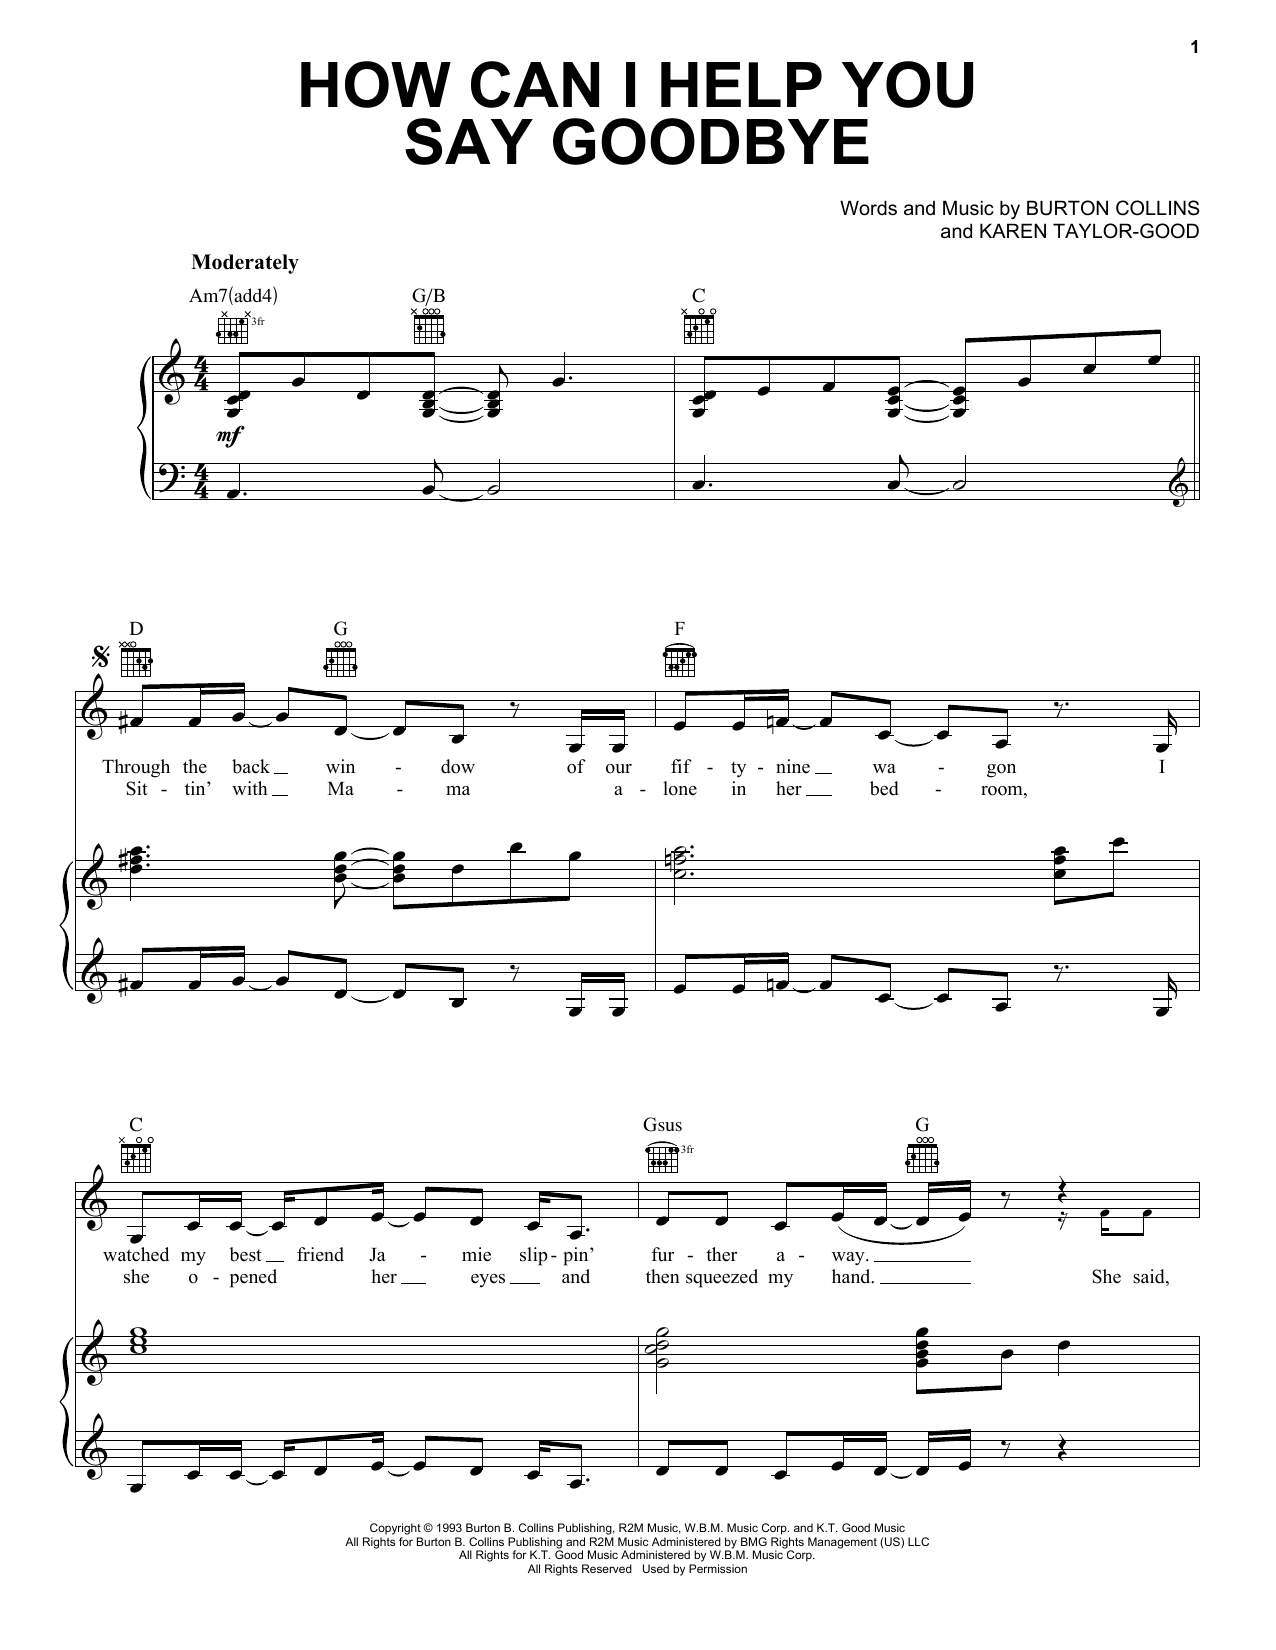 Download Patty Loveless How Can I Help You Say Goodbye Sheet Music